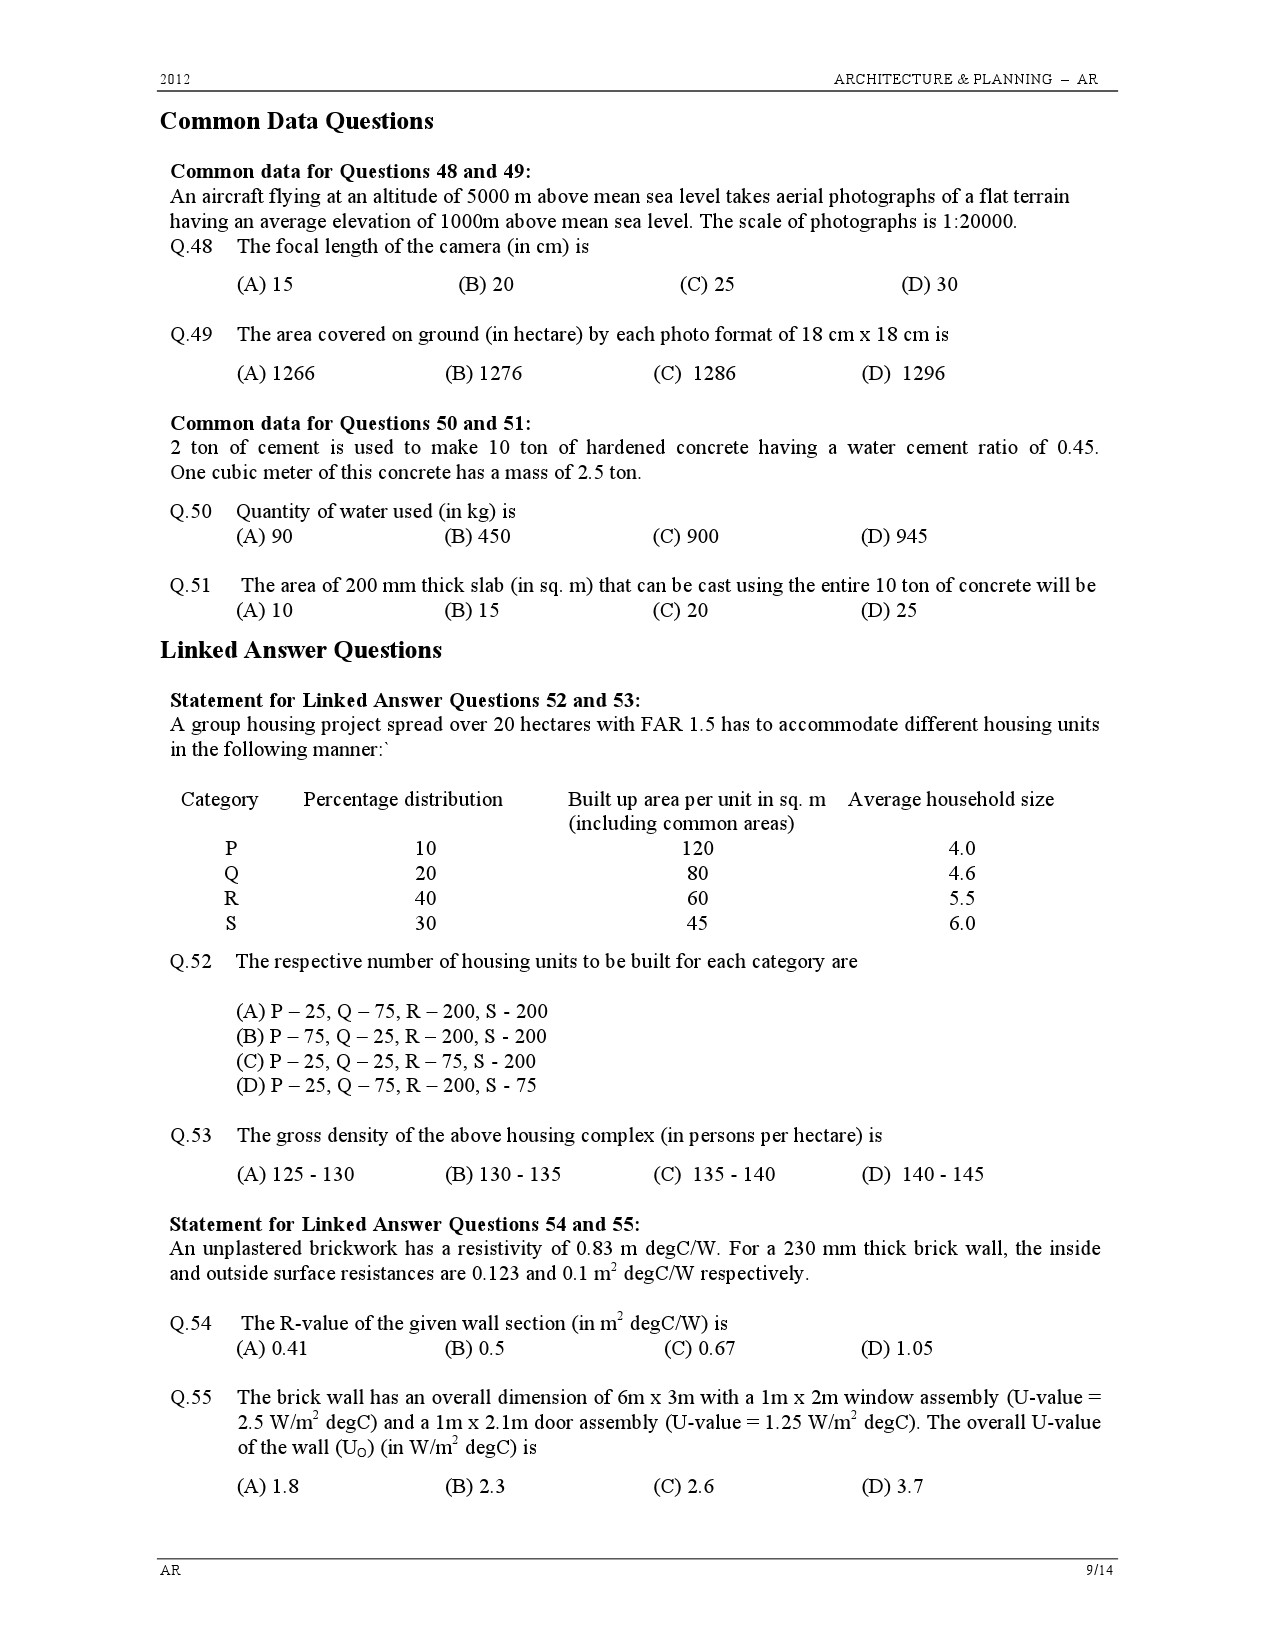 GATE Exam Question Paper 2012 Architecture and Planning 9